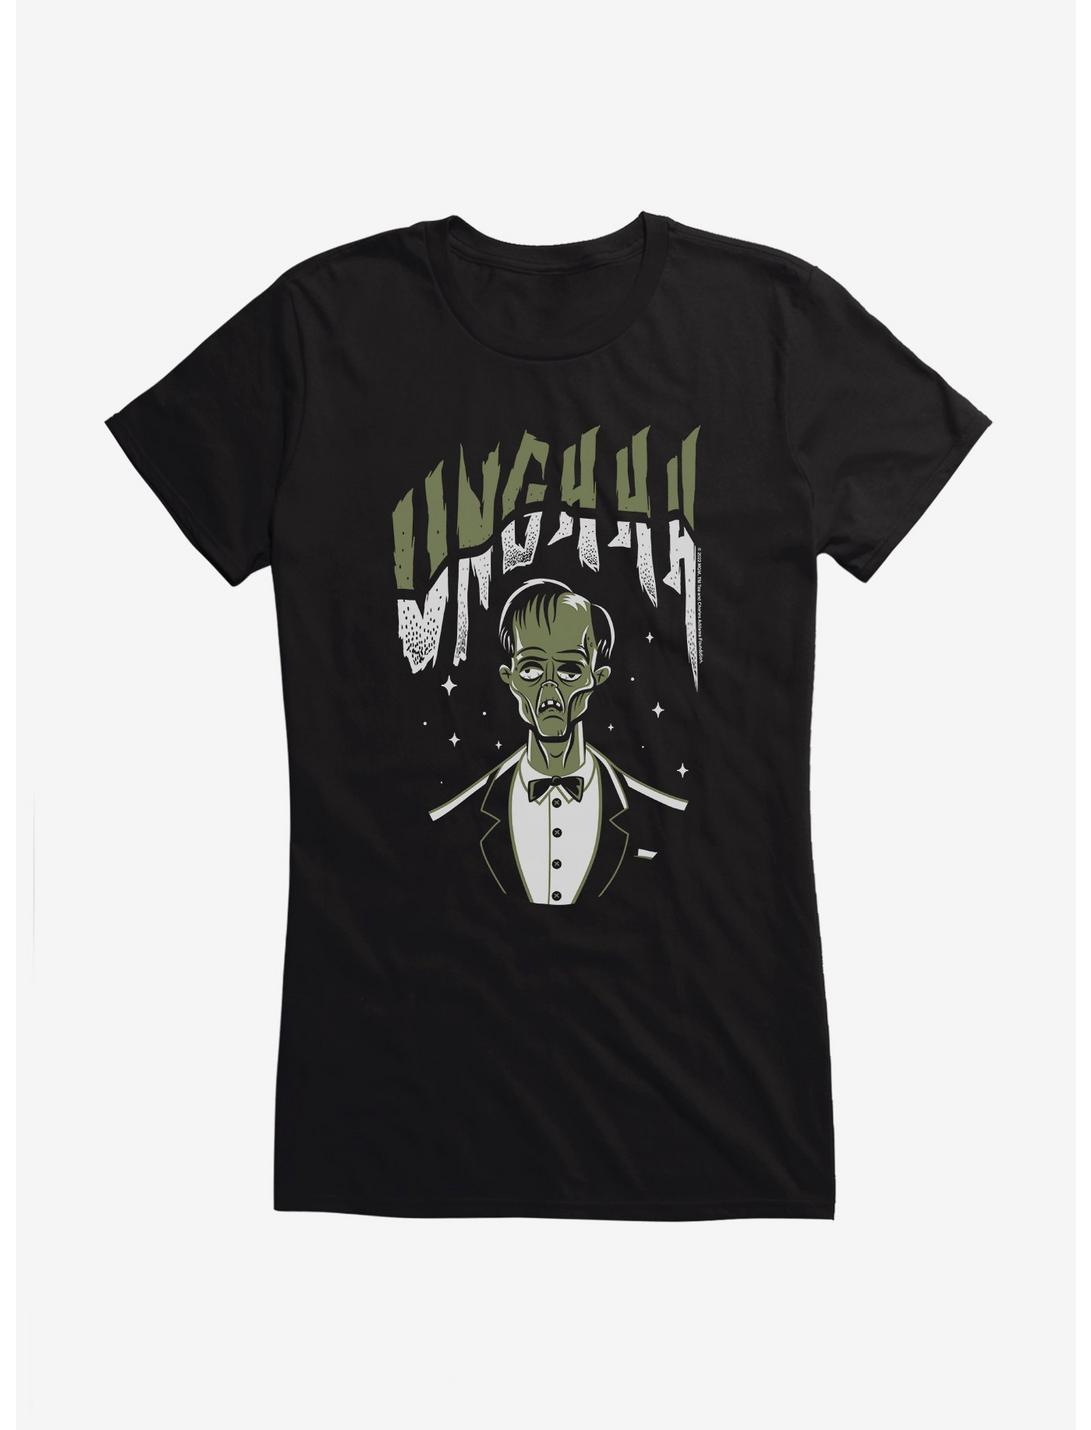 Addams Family Movie Caricature Lurch Unghhh Girls T-Shirt, BLACK, hi-res